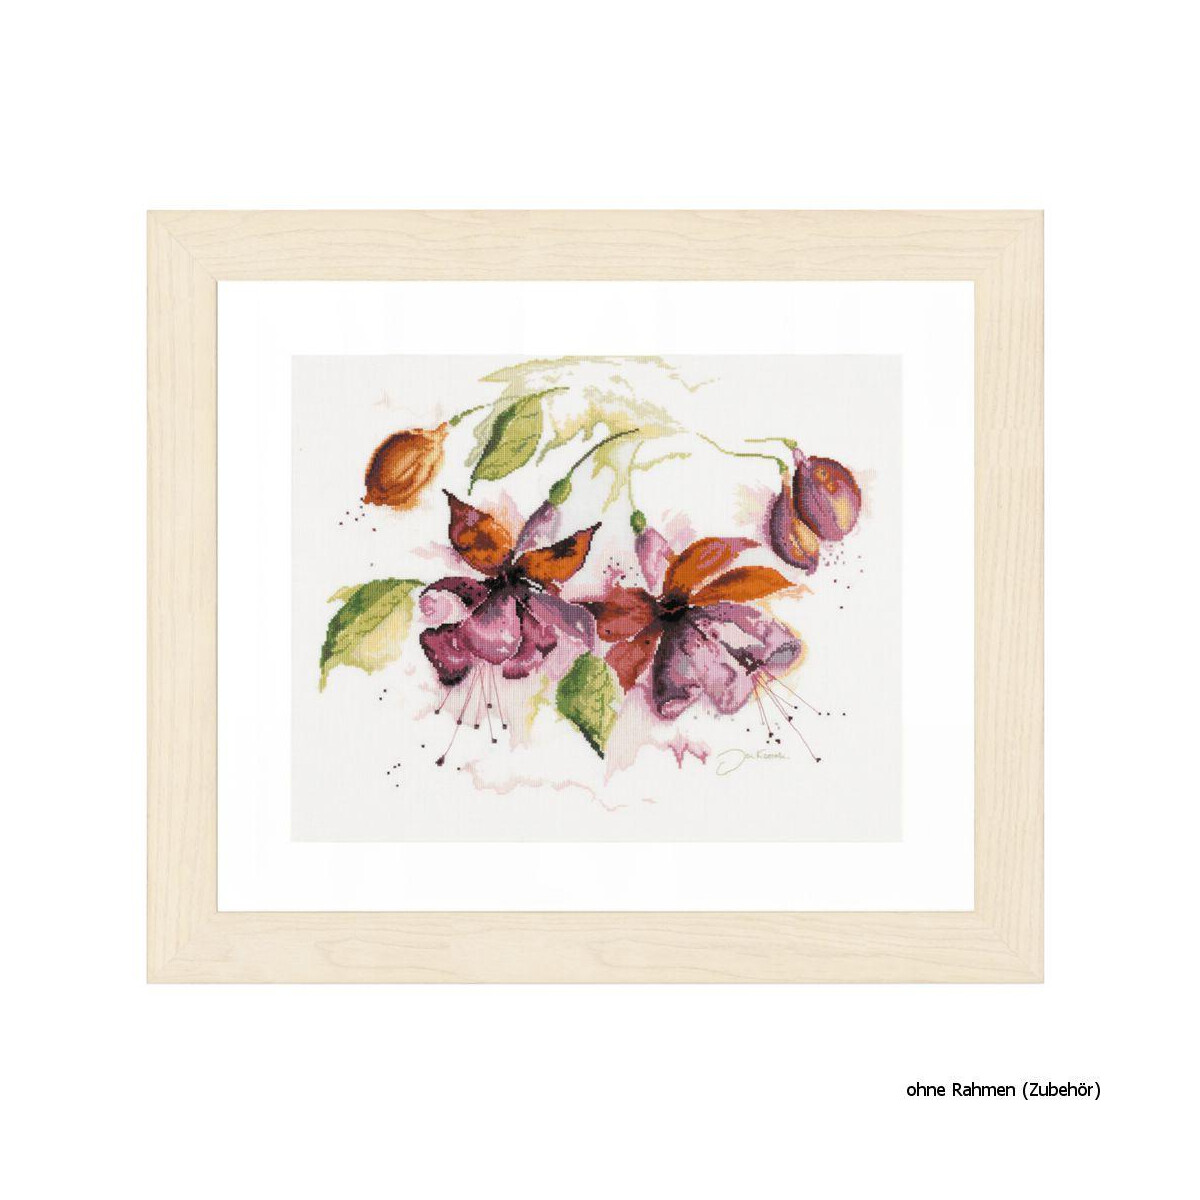 A detailed watercolor painting with a light wood frame....